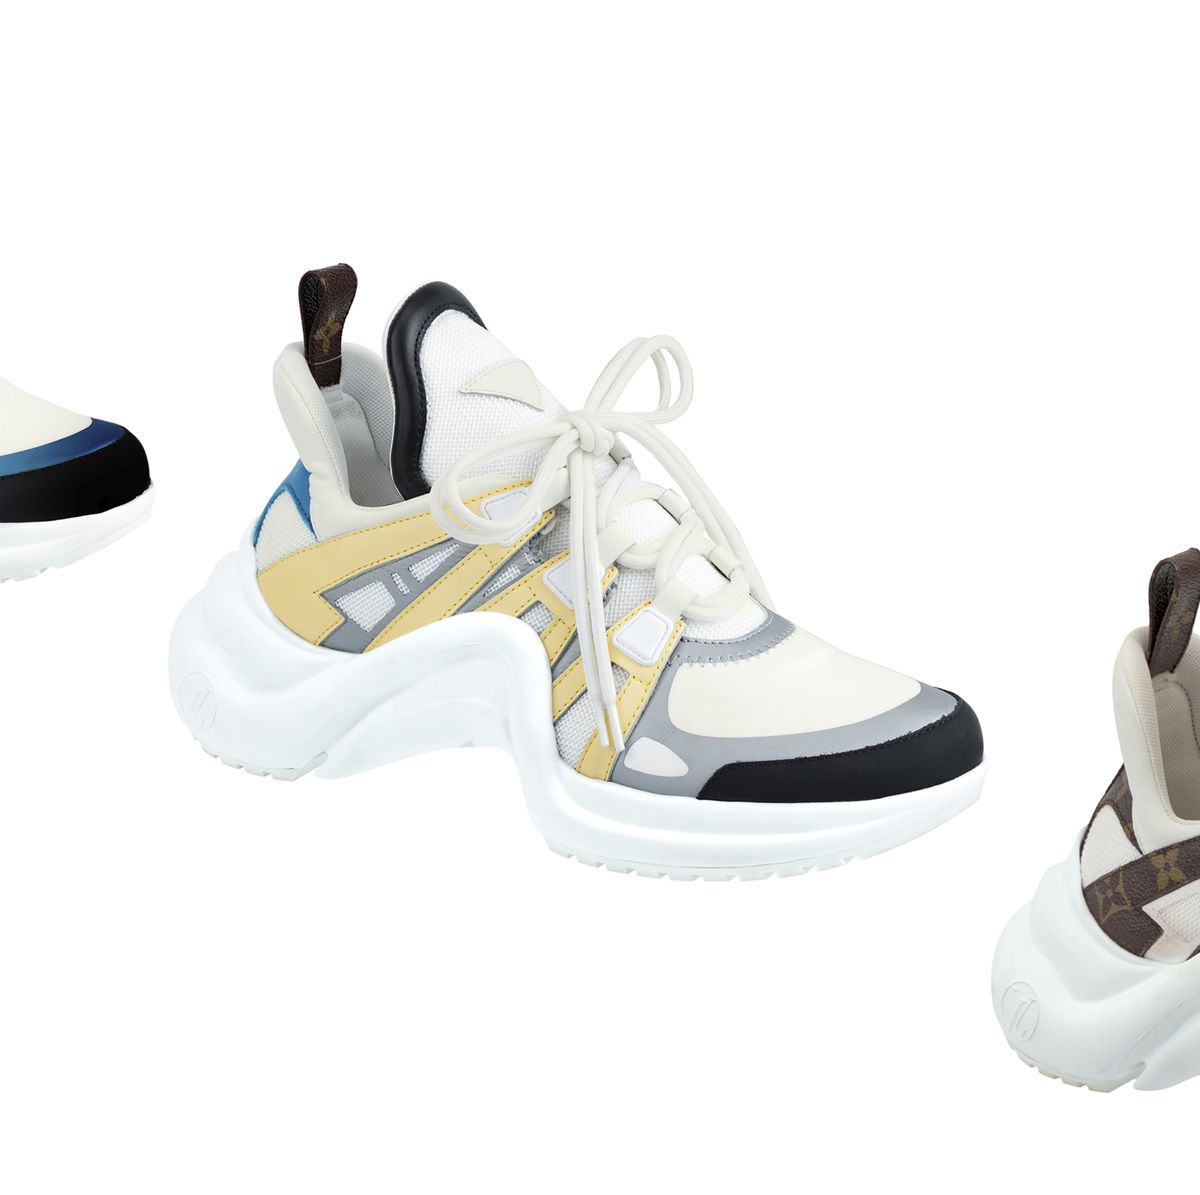 Louis Vuitton ups its presence in the sneaker market with new runners